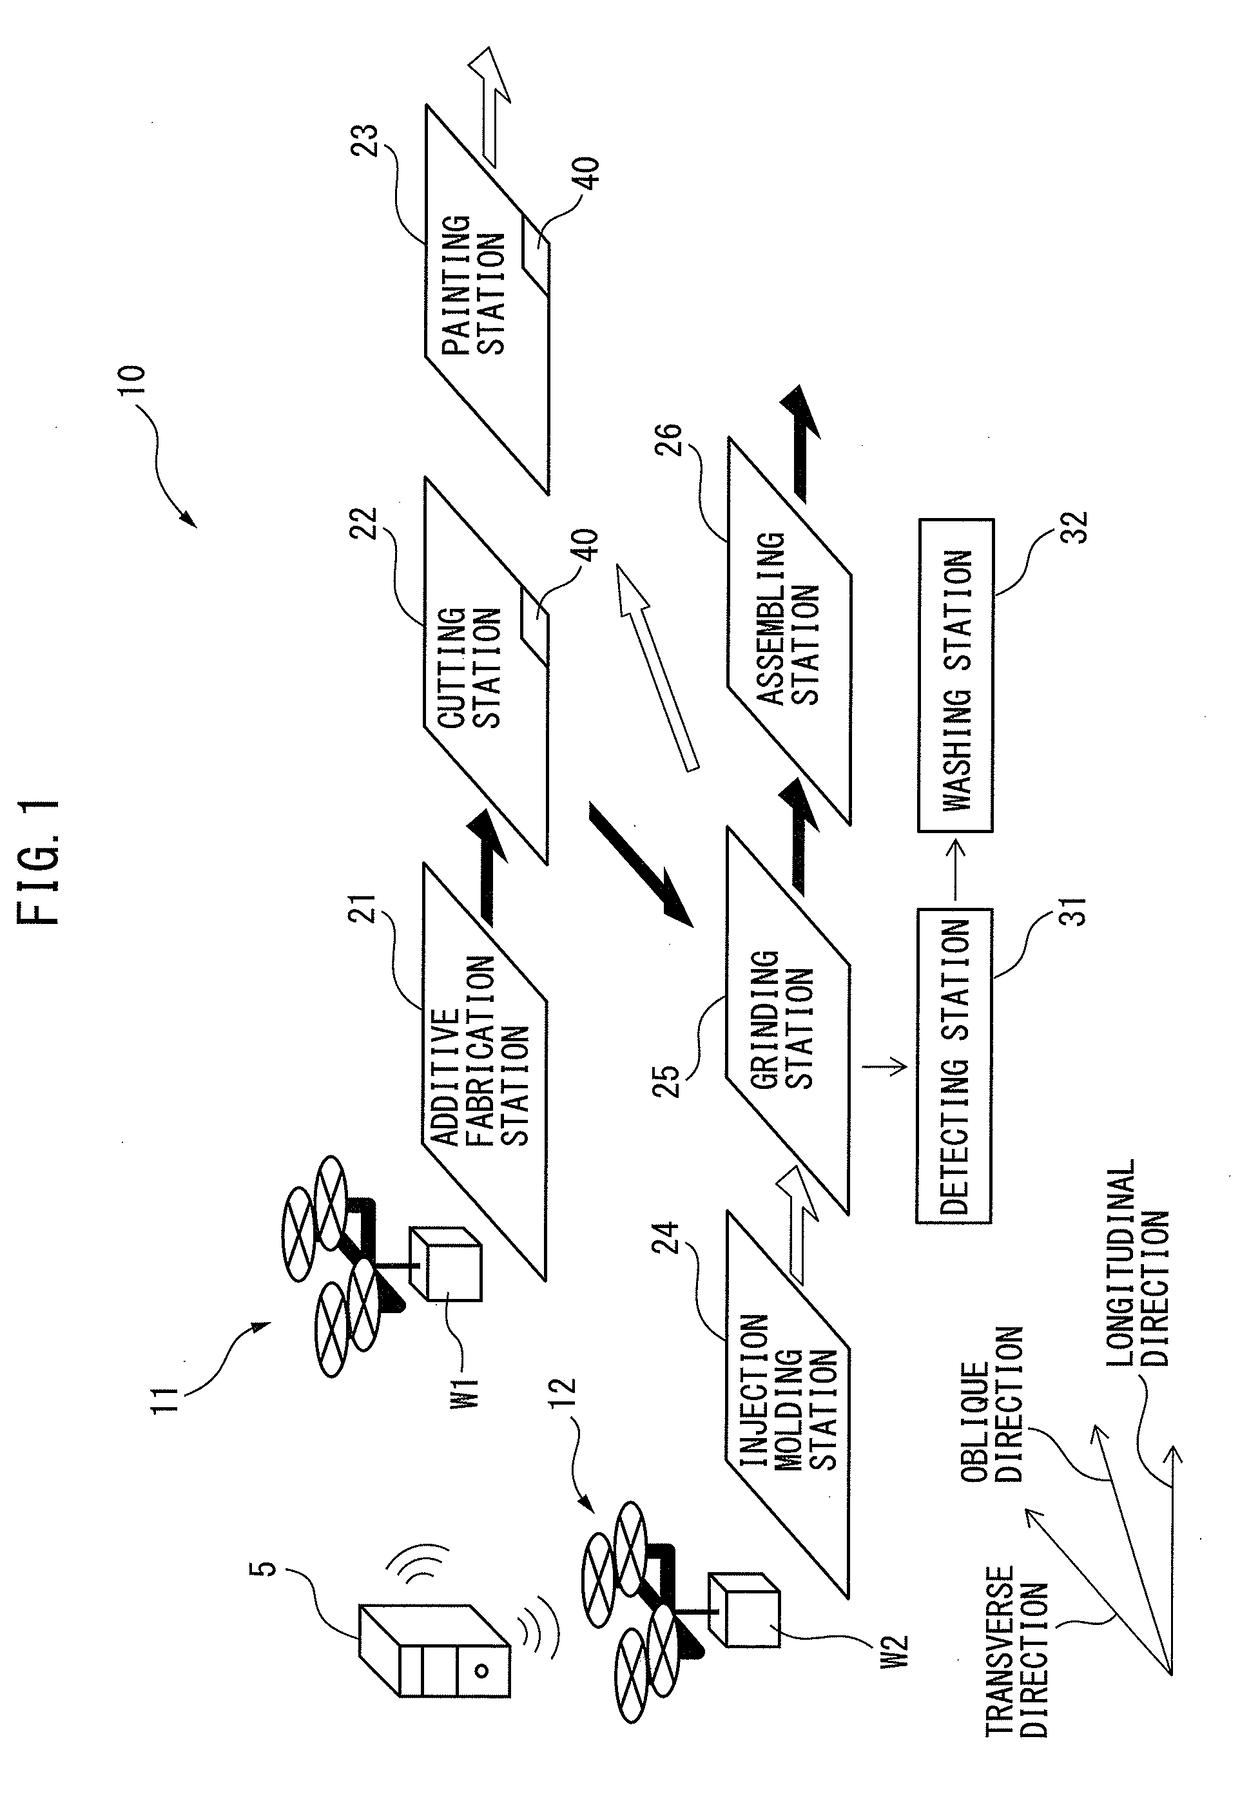 Manufacturing system in which workpiece is transferred